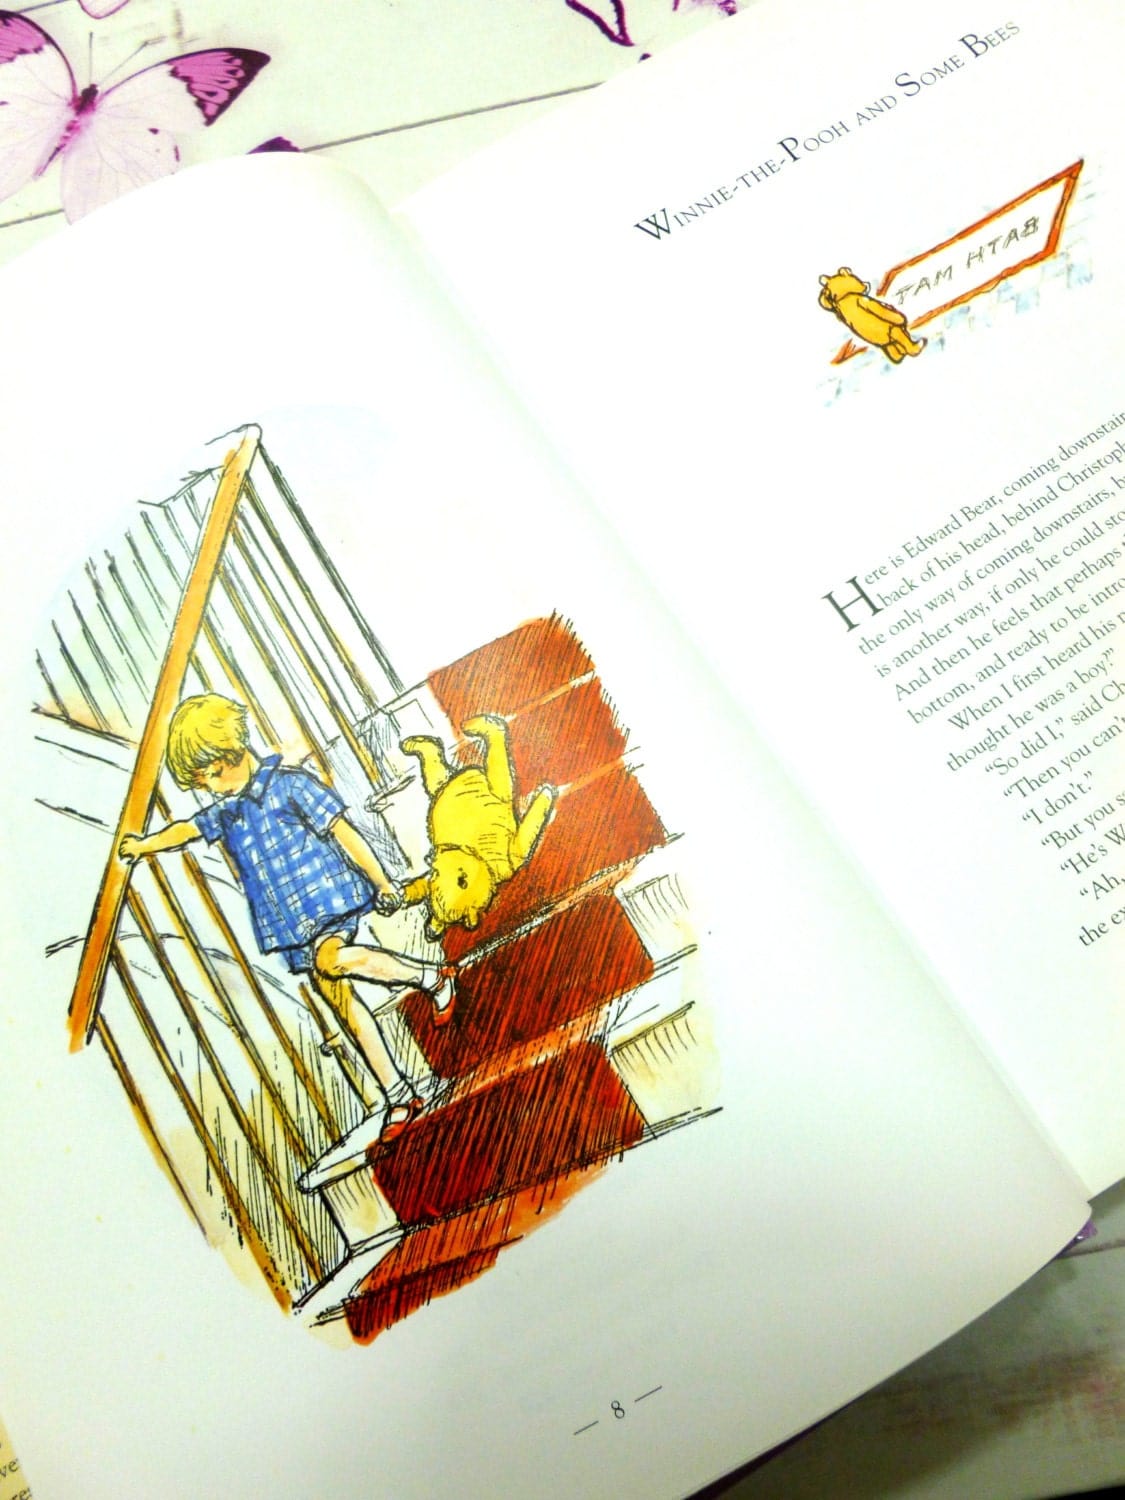 Christopher Robin carrying Pooh Bear down the stairs colour illustration from Front cover of A World of Winnie the Pooh Vintage Hardback Childrens Book. 